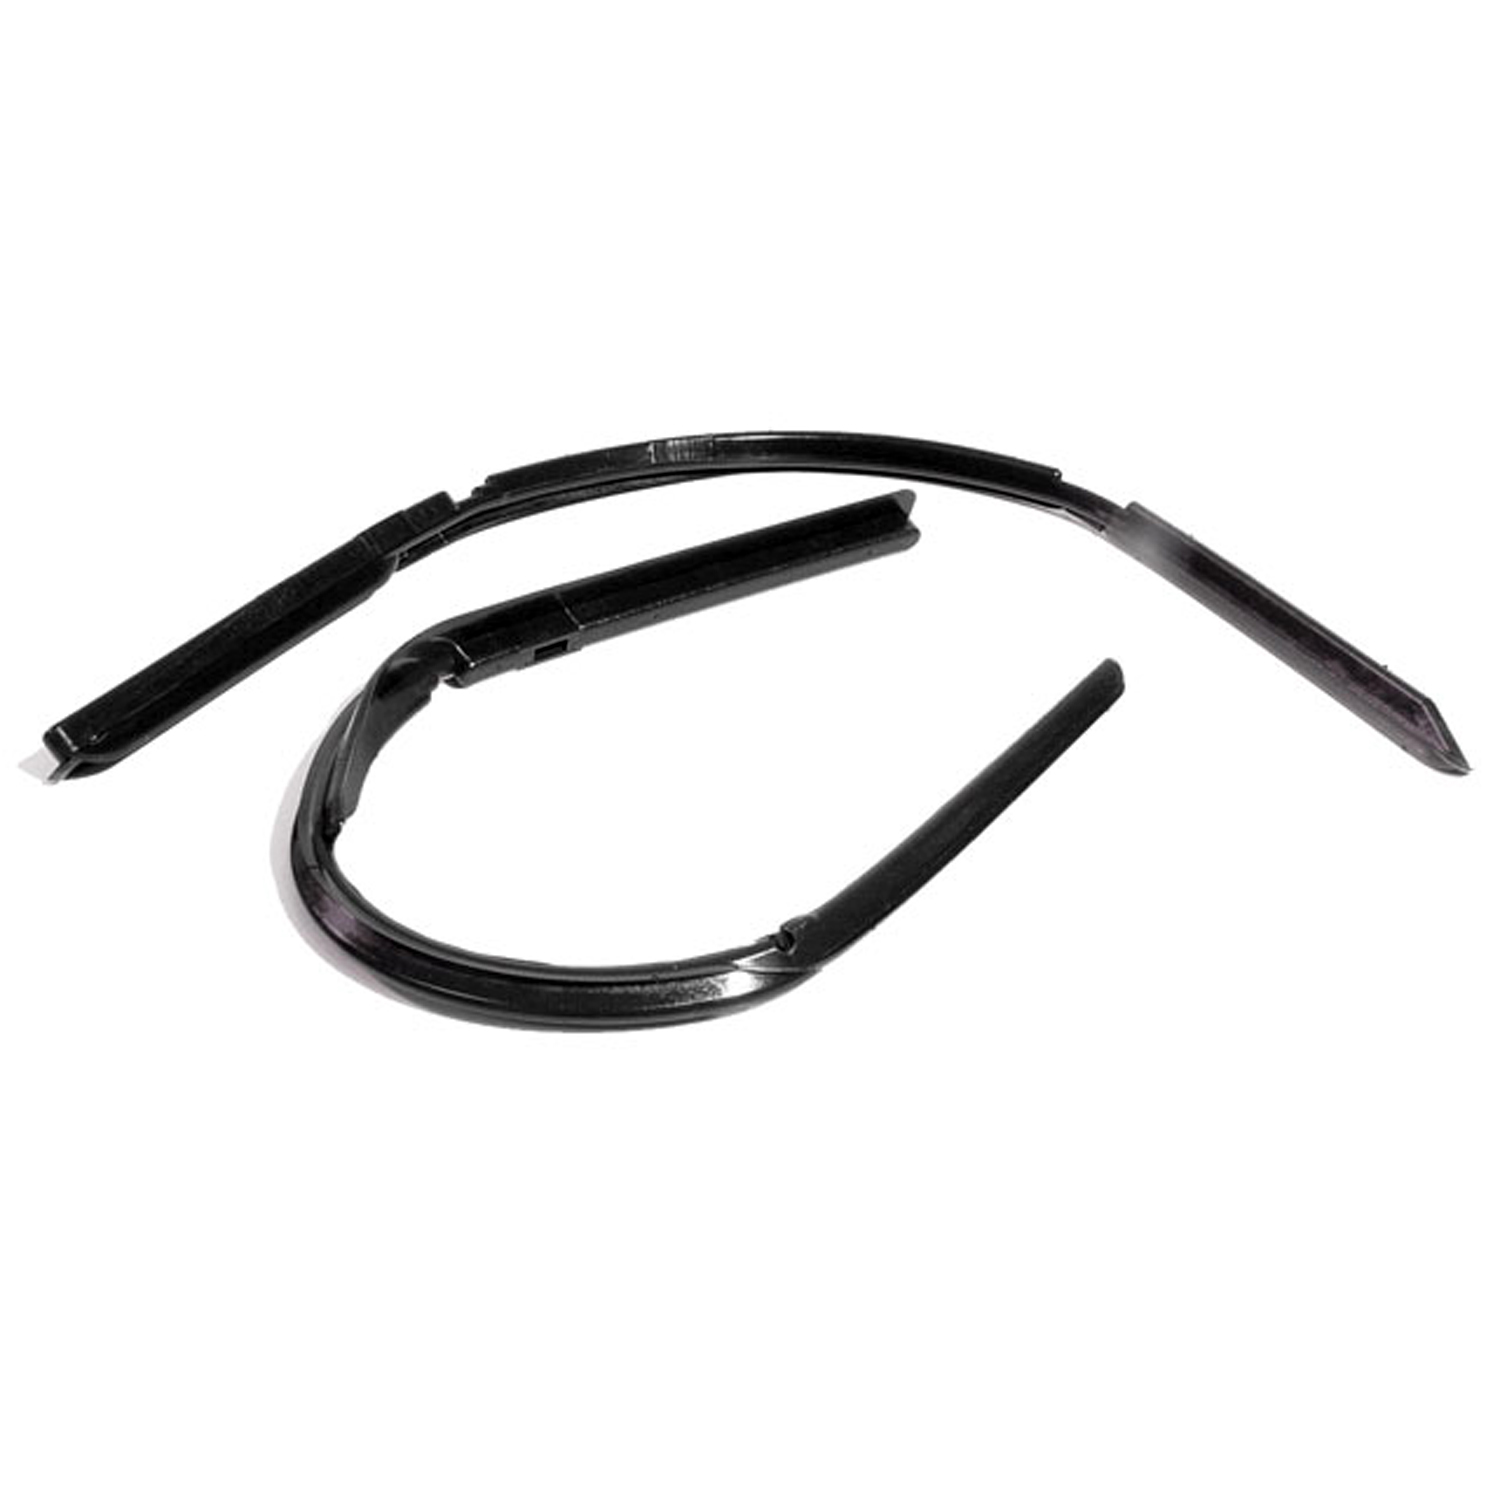 1947 Chevrolet Stylemaster Series Front Vent Window Seals, for Convertibles.  Pair RL-WR 7313